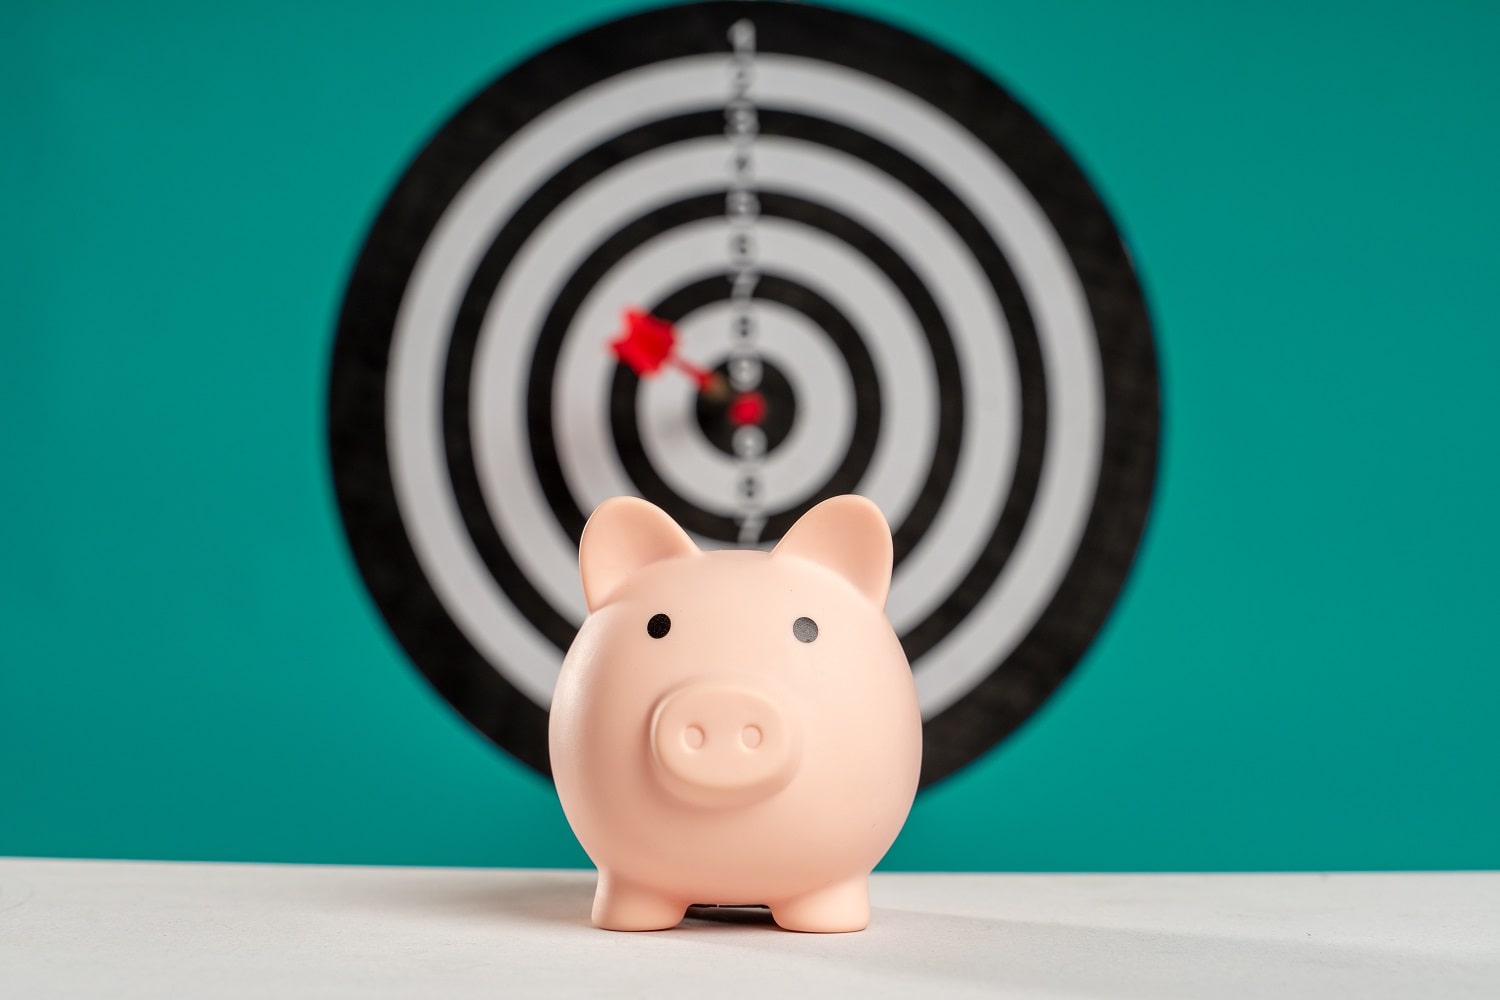 A piggy bank with a target in the background, representing an investment budget for Amazon sellers starting up a business.